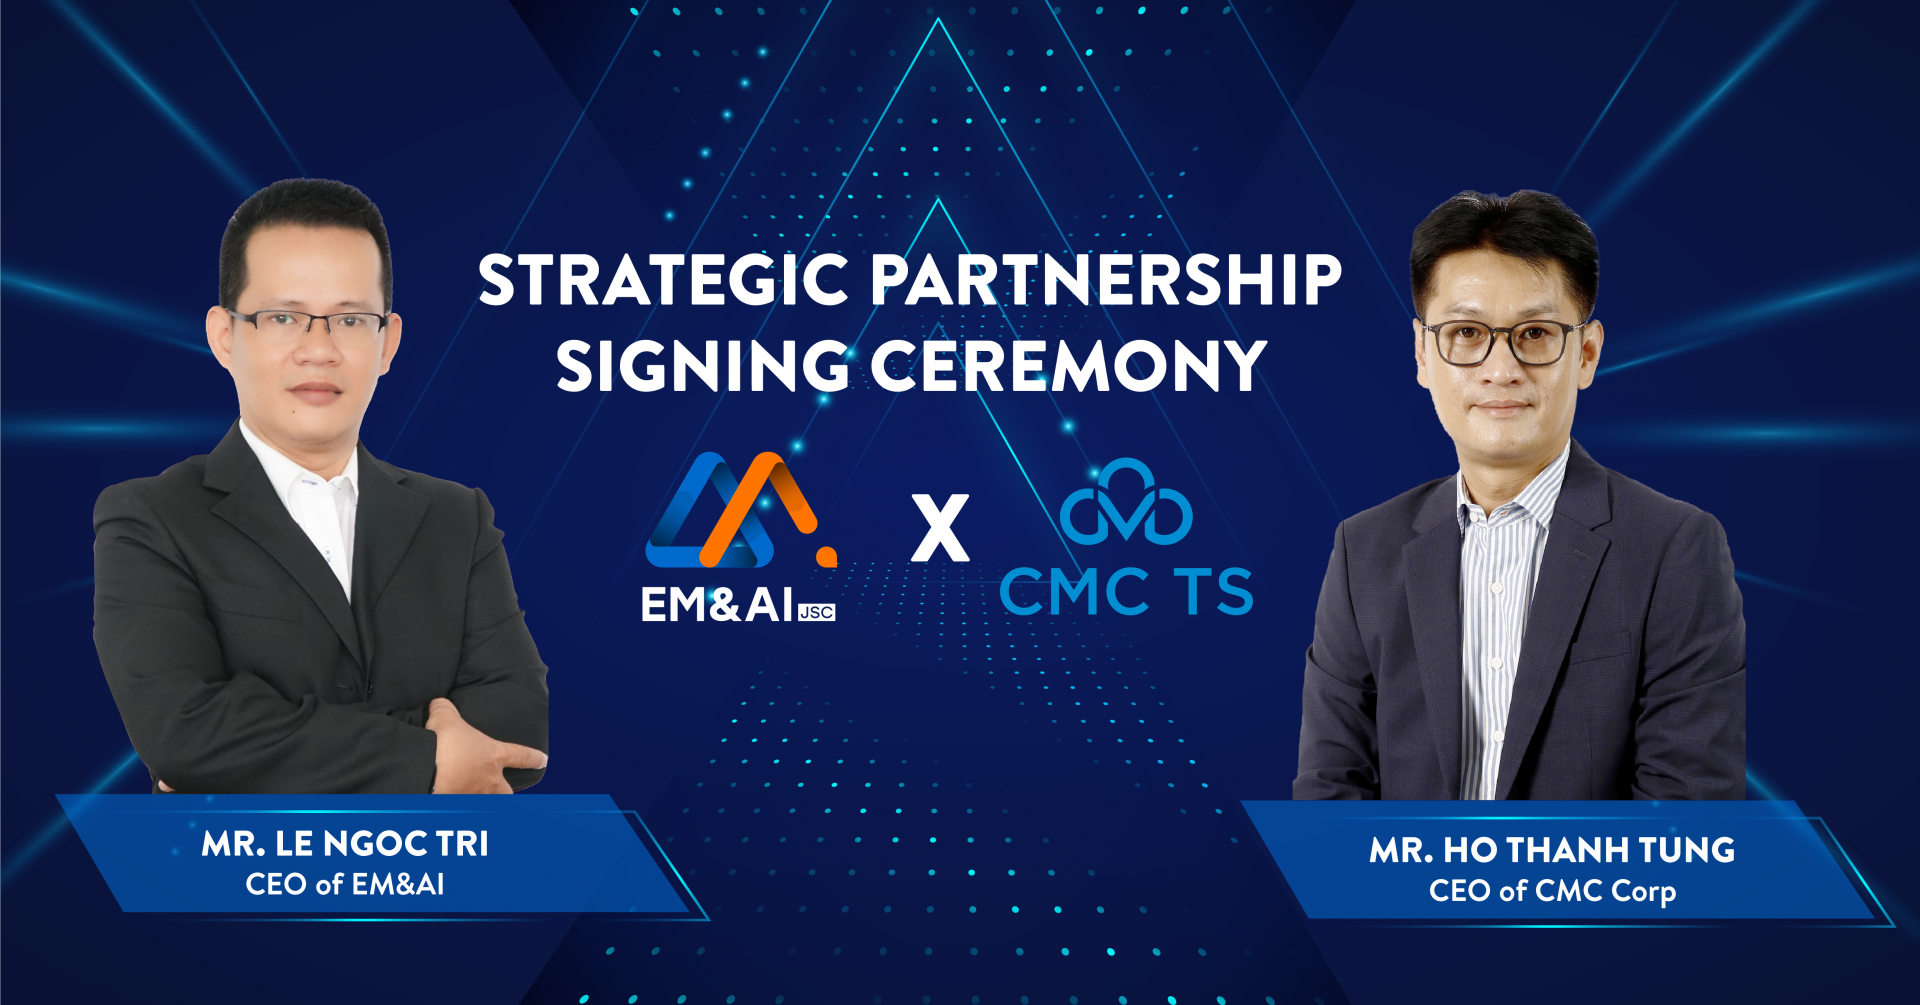 EM&AI and CMC TS to accelerate AI applications among Vietnamese firms